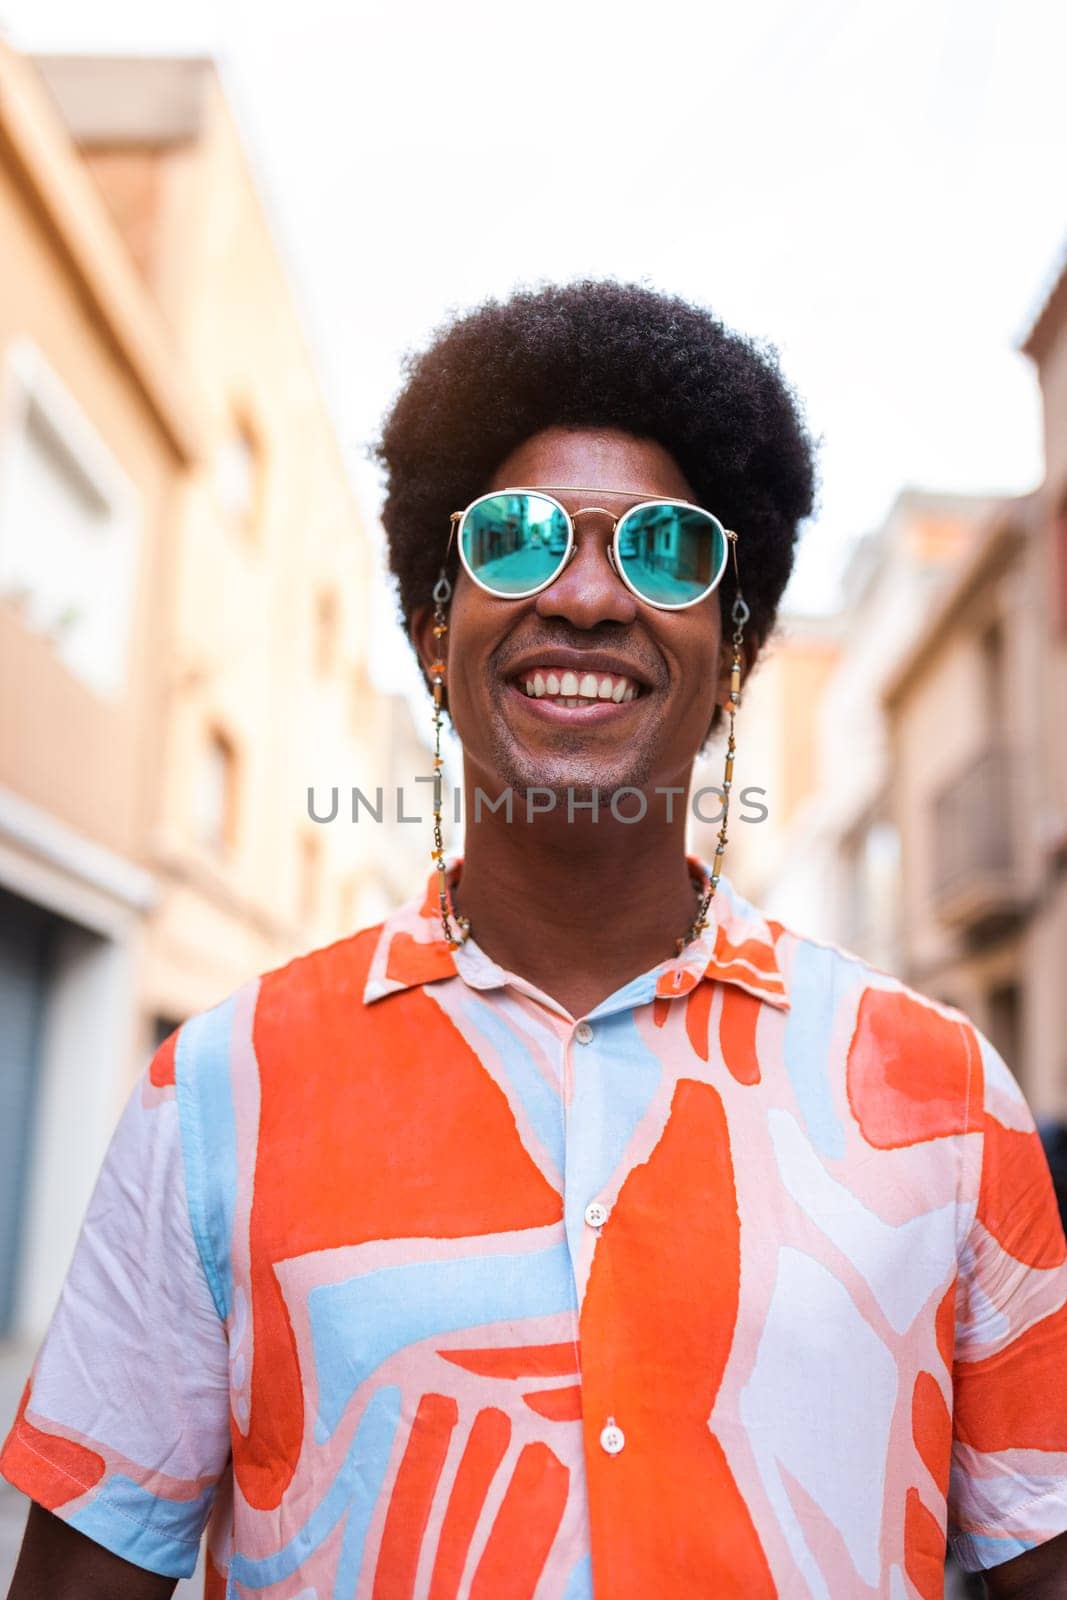 Vertical portrait of young happy and smiling black man wearing sunglasses outdoors. Lifestyle concept.